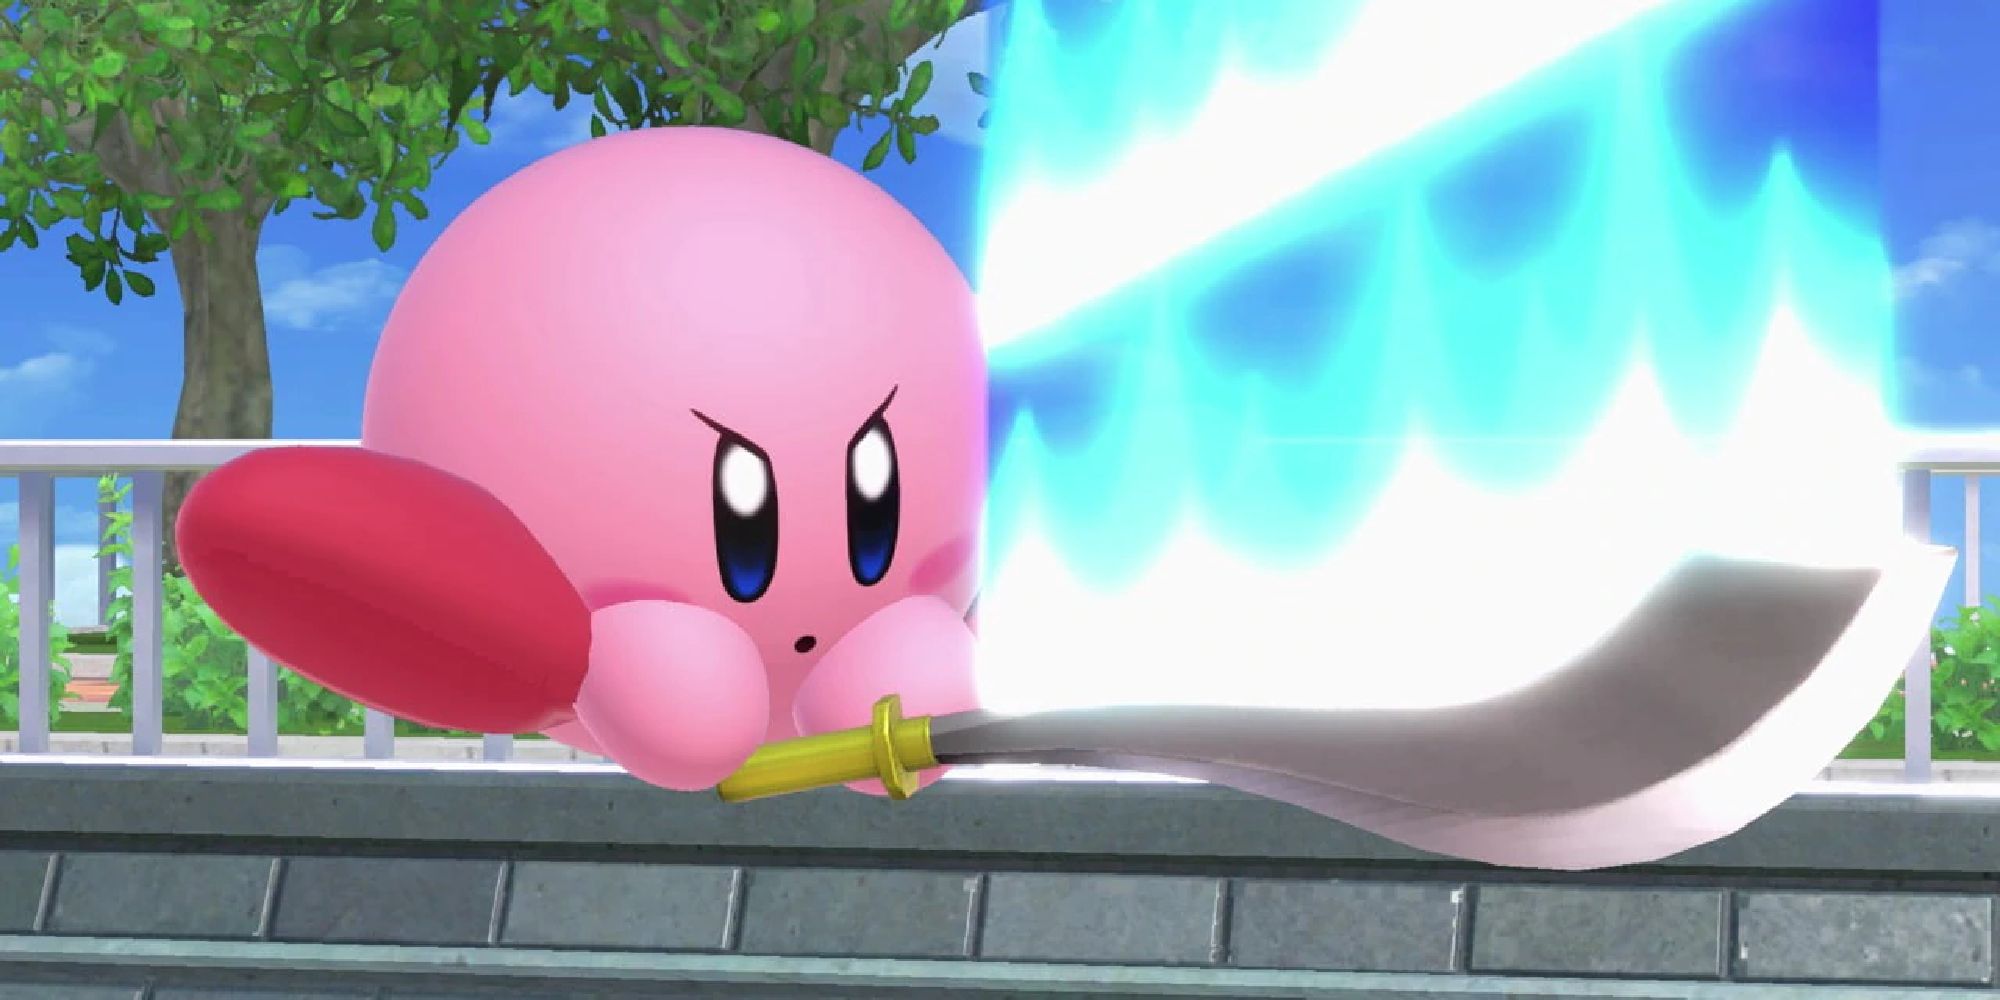 Kirby slicing downward with the Air Cutter on Tomodachi Life